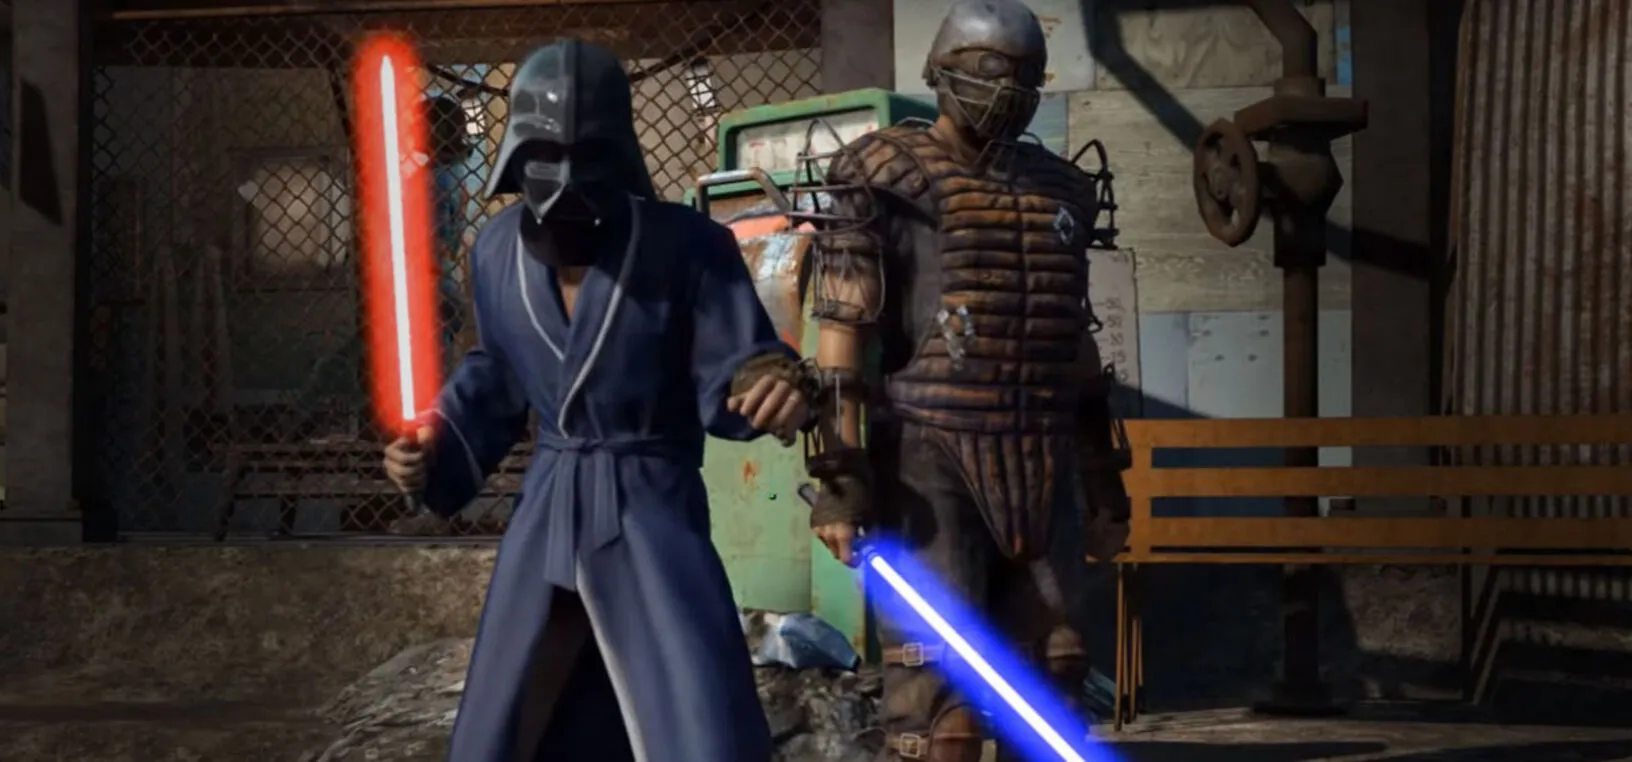 Star wars the lightsaber fallout 4 фото 13